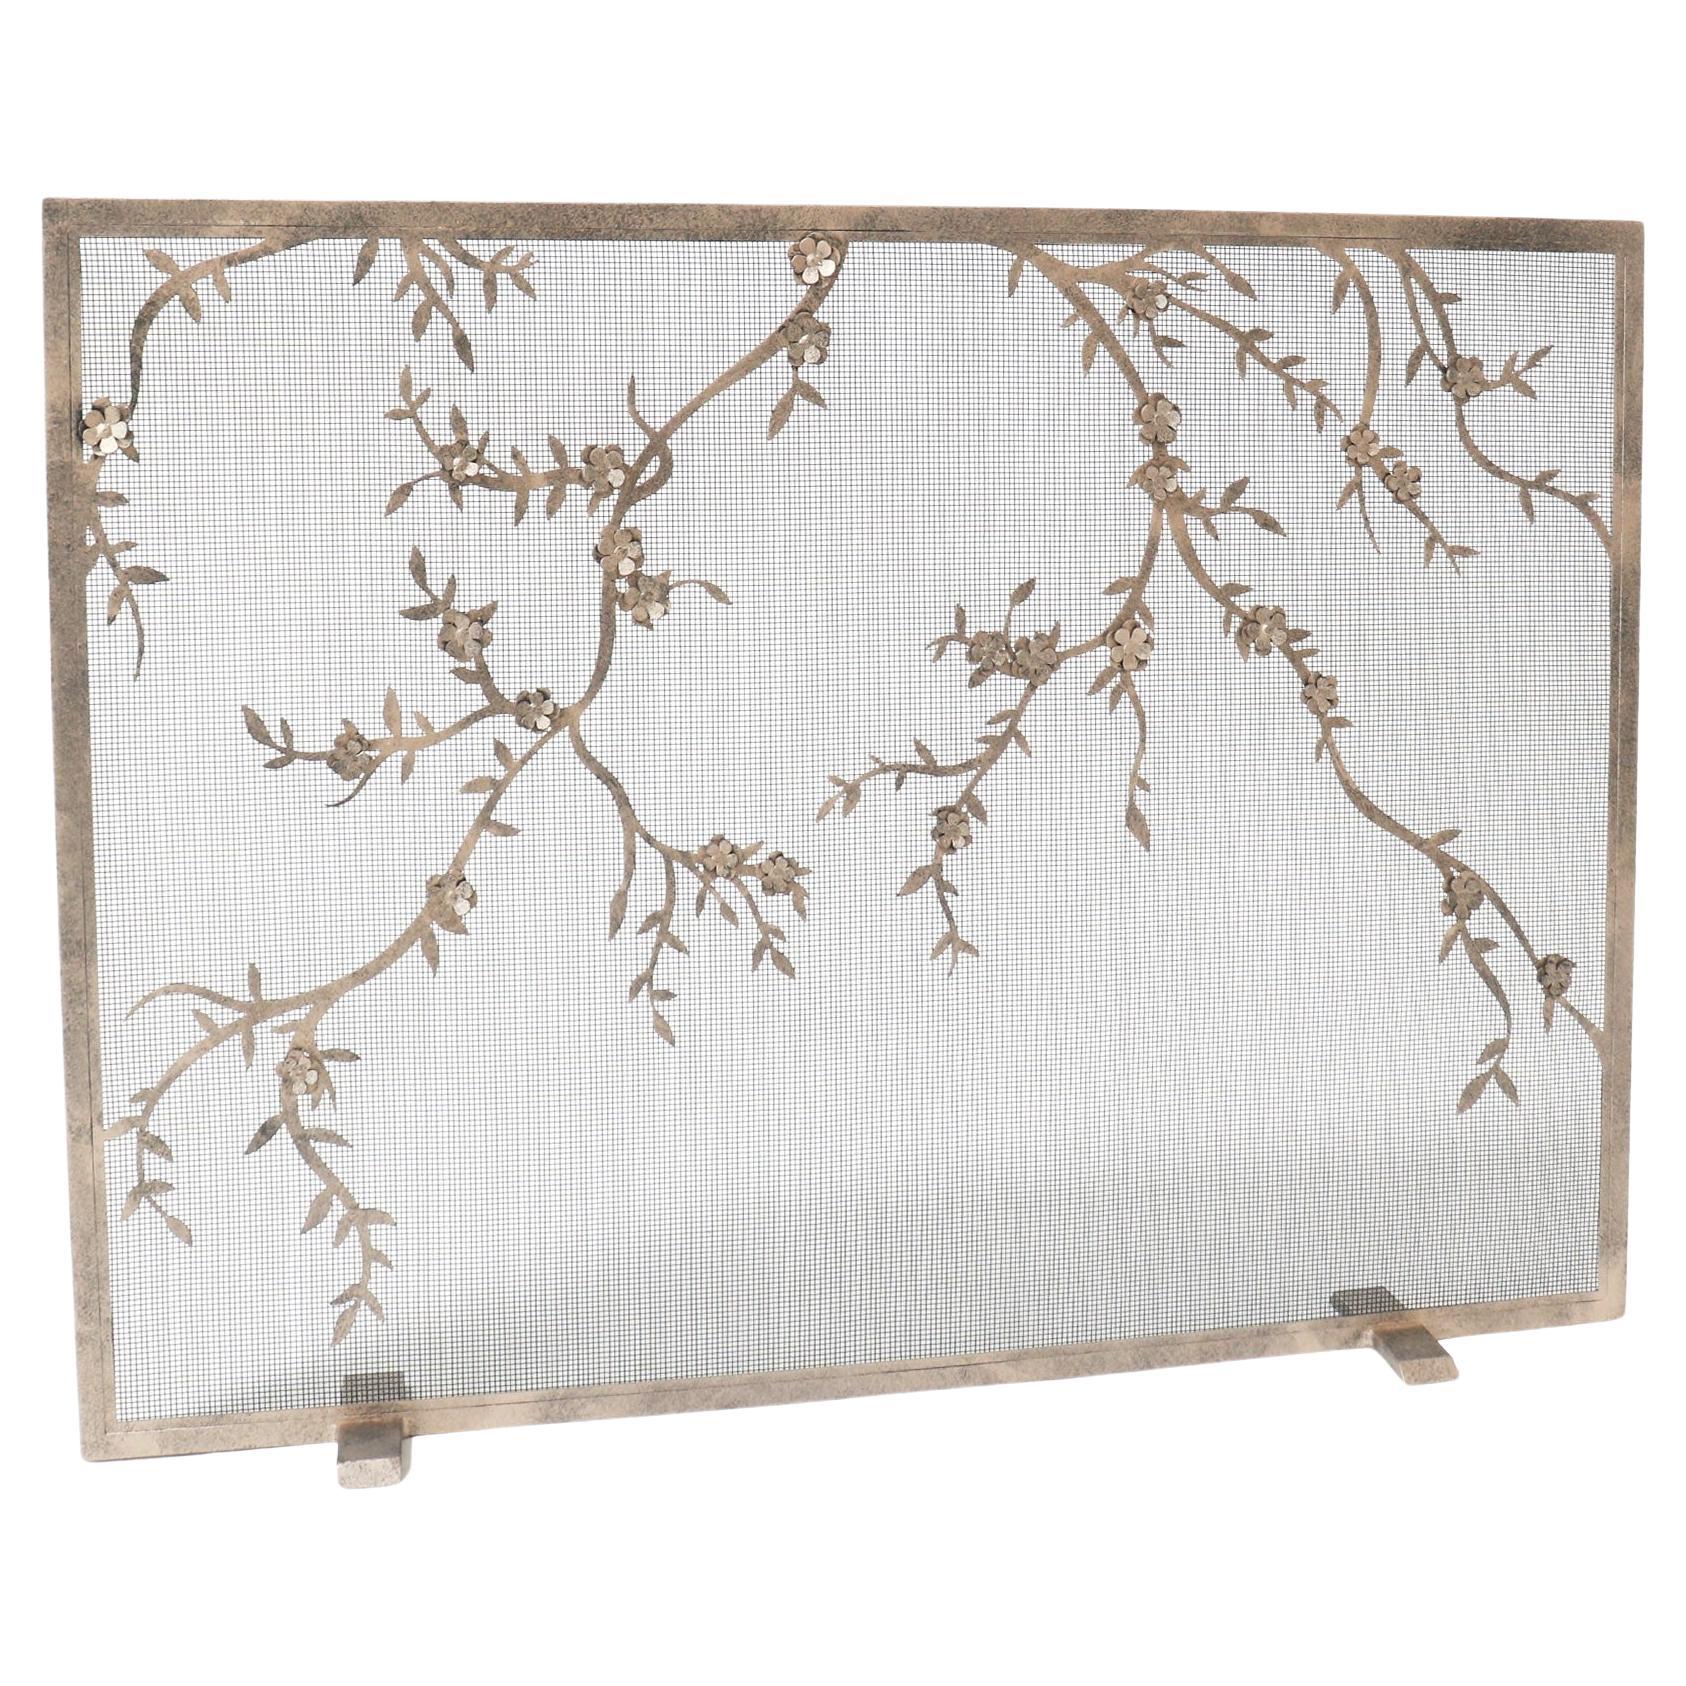 Plum Blossom Fireplace Screen in Aged Silver For Sale